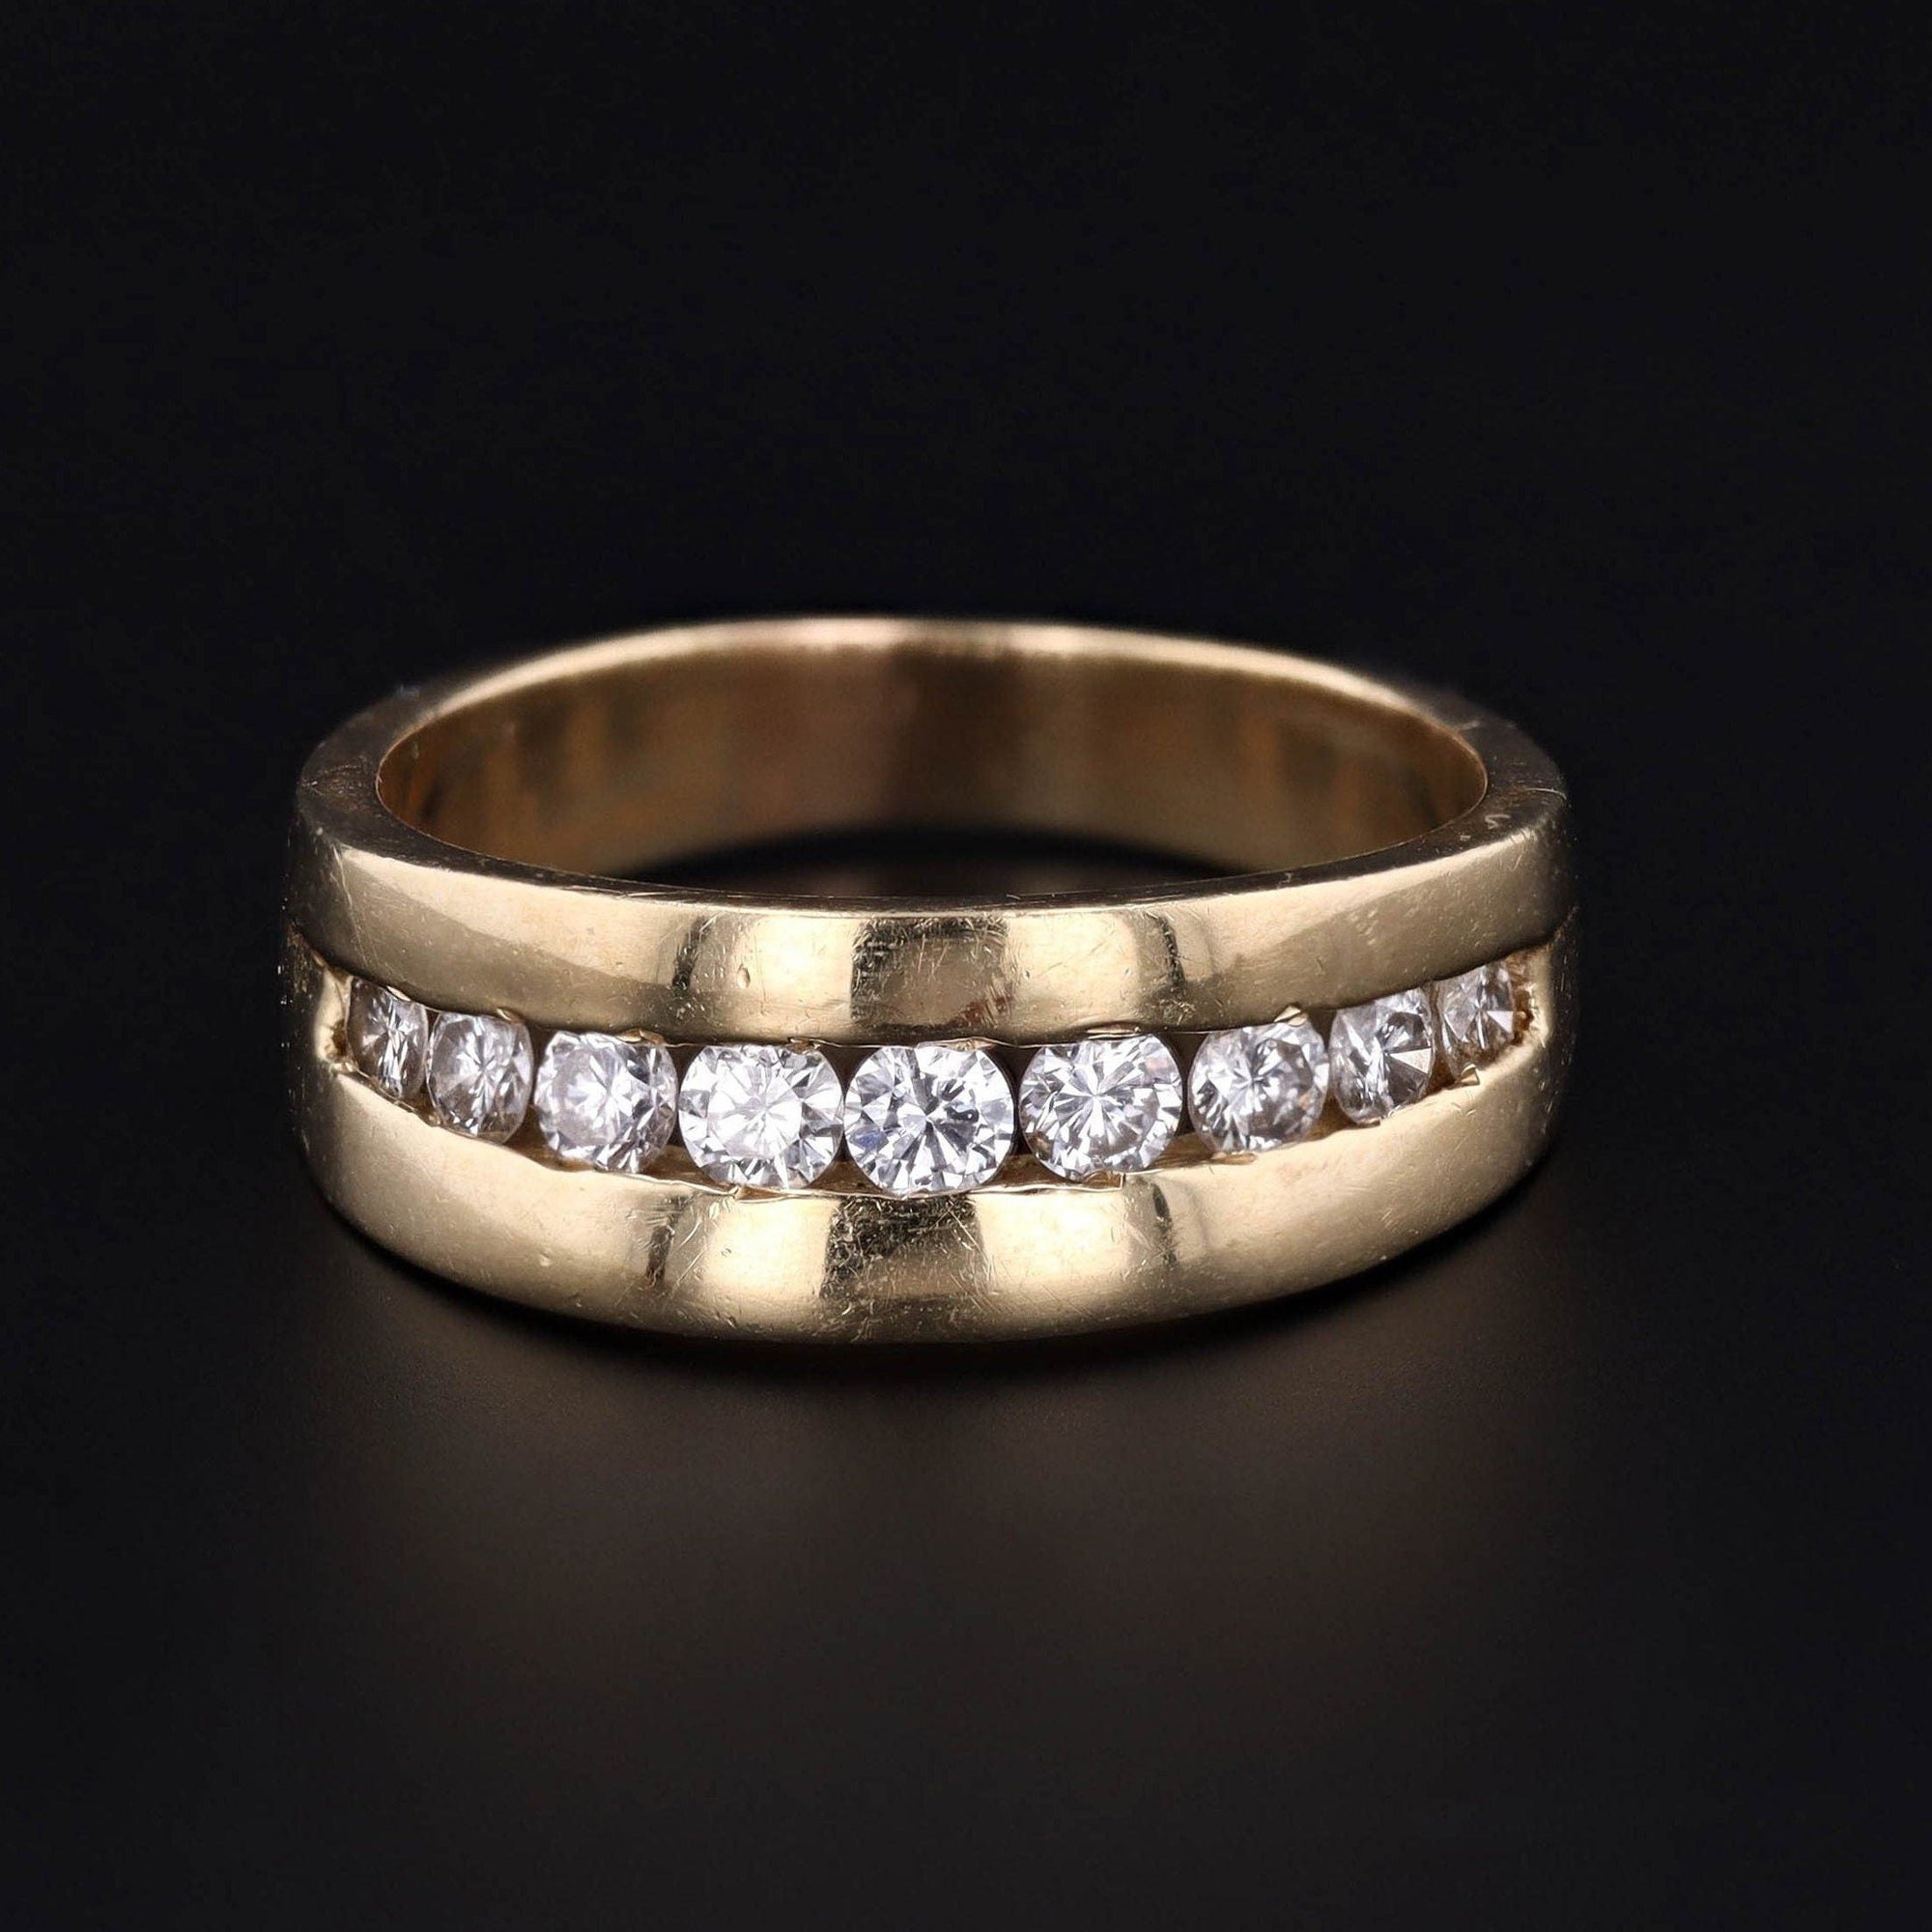 Vintage Diamond Band or Ring of 14k Gold